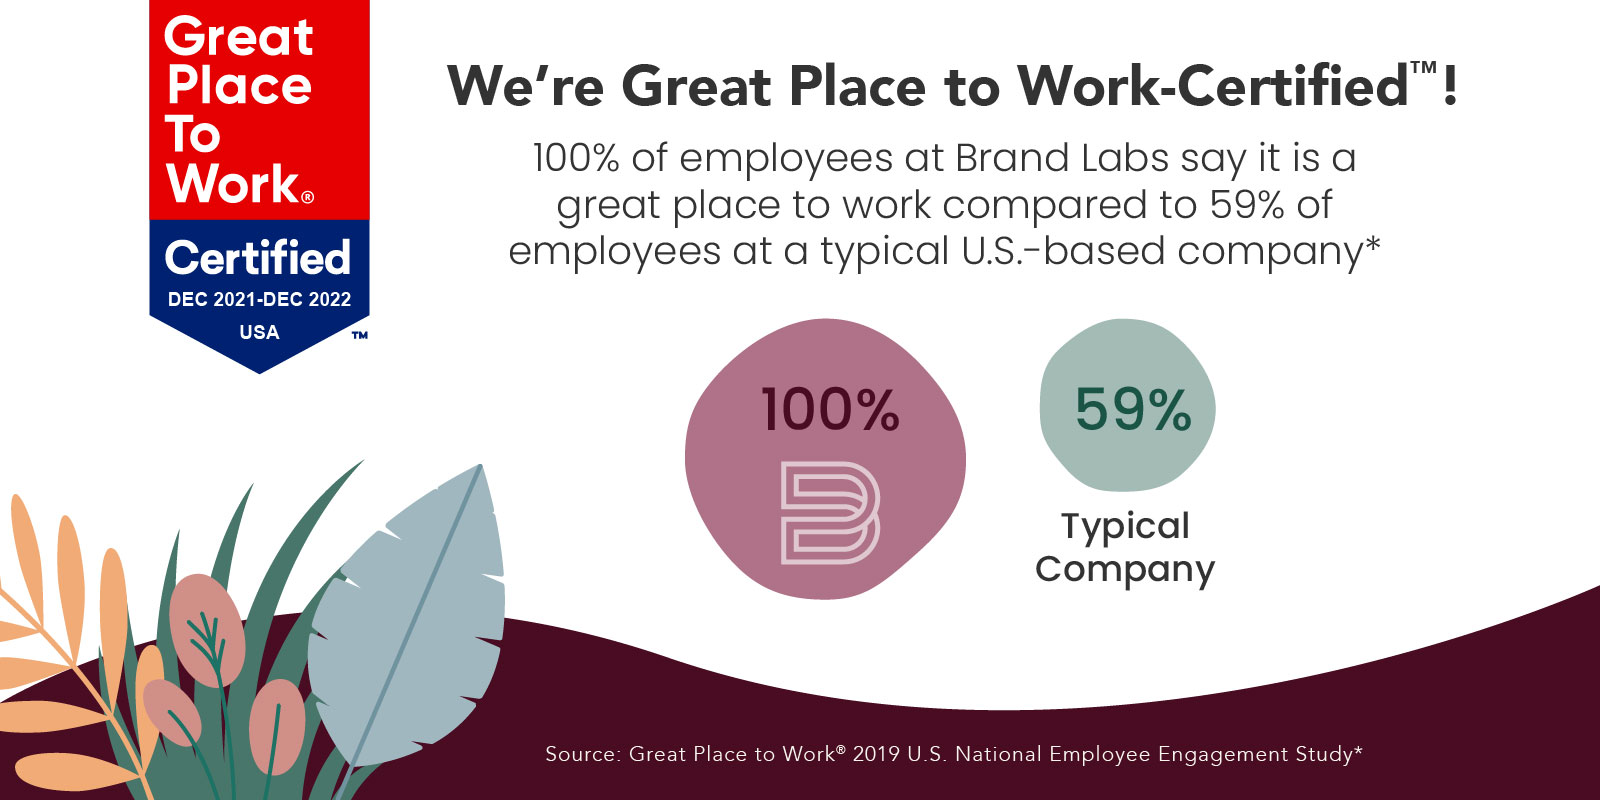 We're Great Place to Work-Certified 